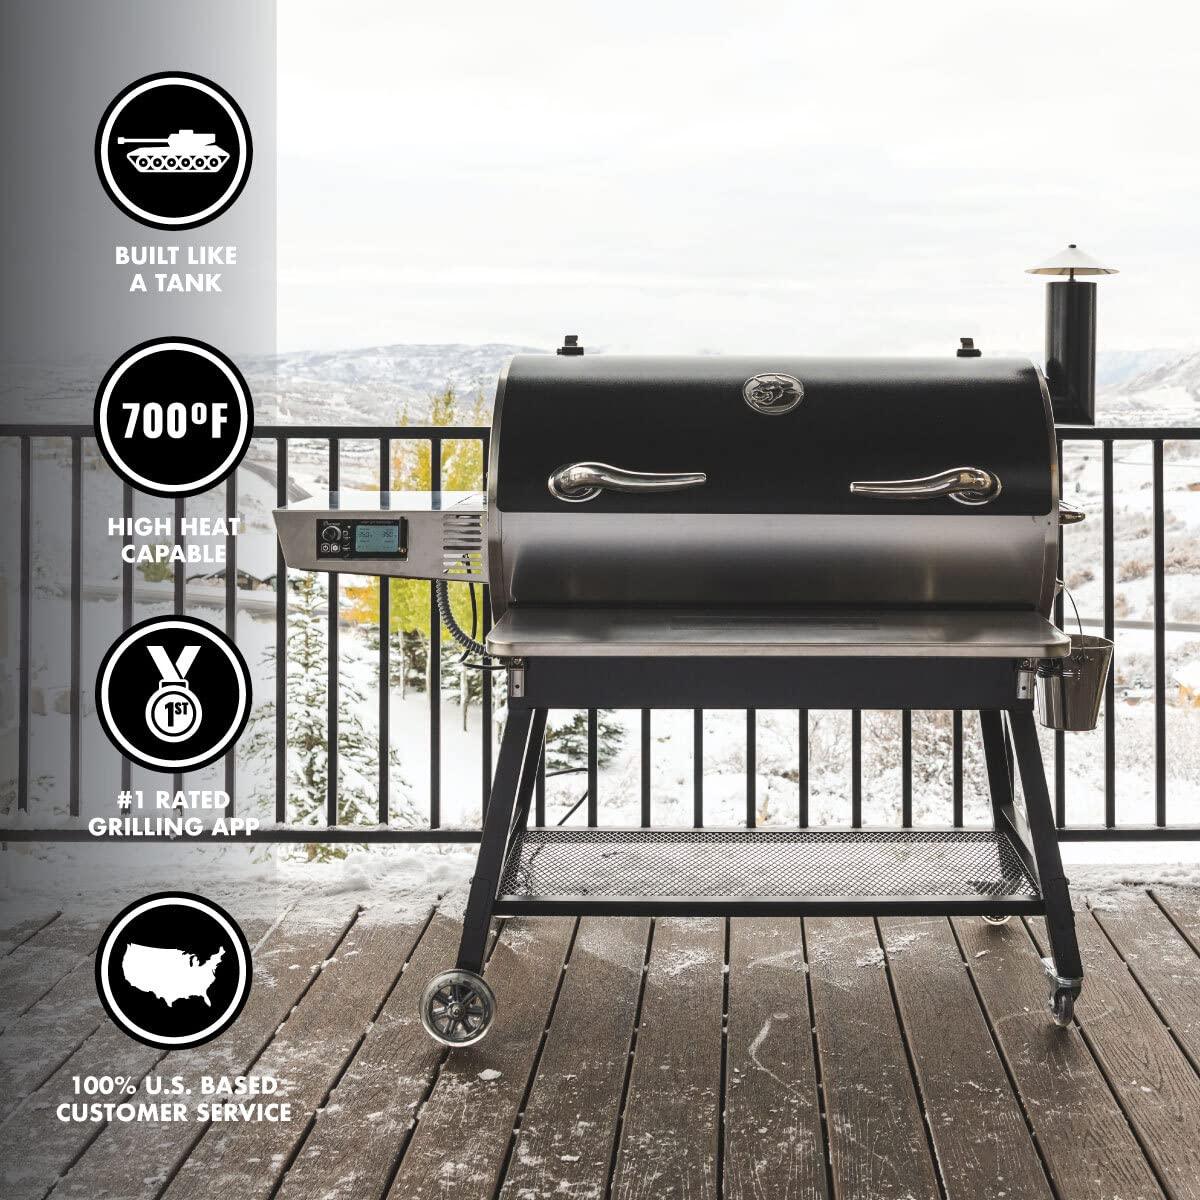 recteq RT-1250 Wood Pellet Grill - Wifi Enabled Smart Pellet Smoker - 40 lbs Hopper - Up to 40 Hours of Cooking - Large BBQ Pellet Grill, Big Outdoor Grill - Grill, Sear, Smoke, and More! - CookCave